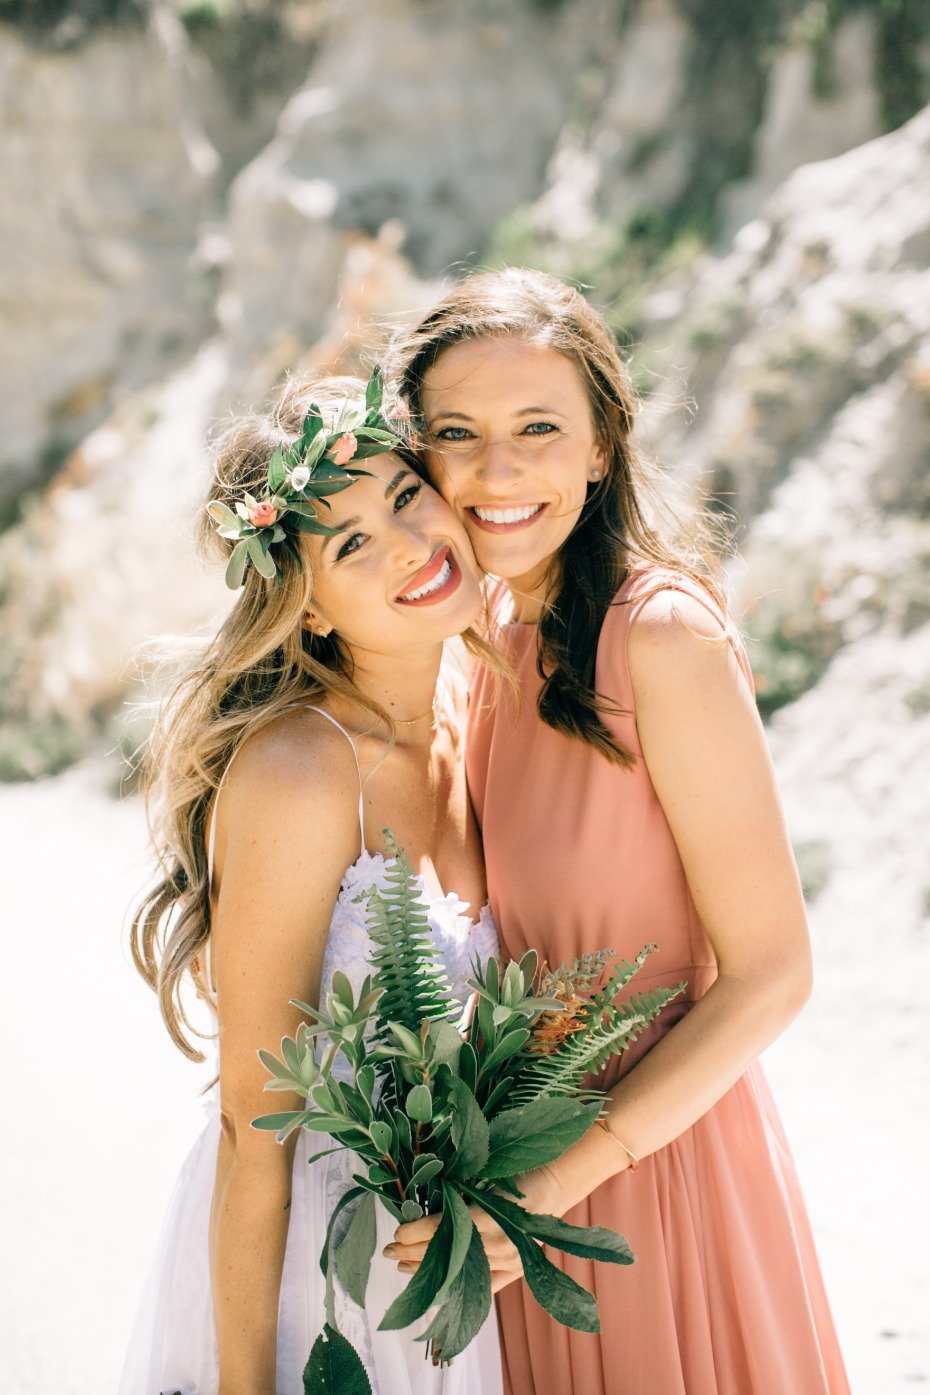 chic greenery as bridesmaid bouquets